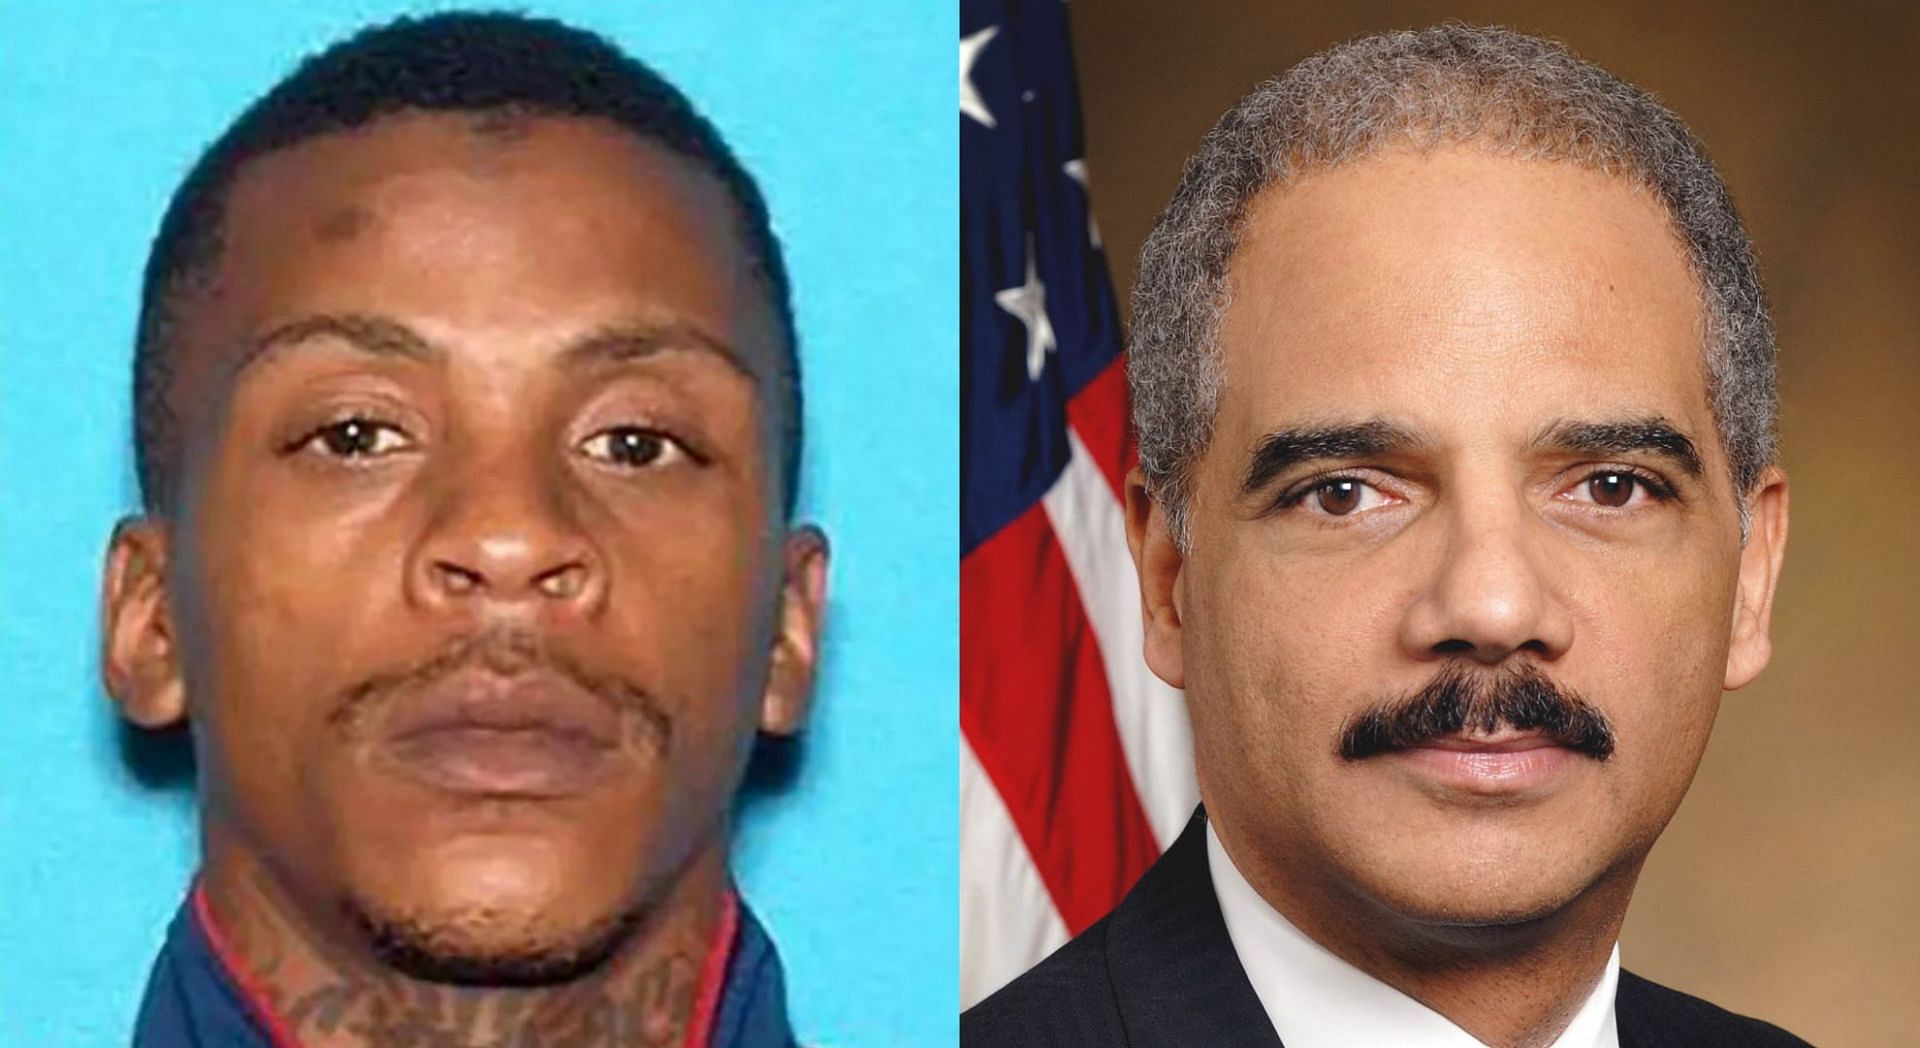 Nipsey Hussel murderer Eric Holder Jr. is not related to former U.S. Attorney General of the same name (Image via DatPiff/Twitter and Getty Images)